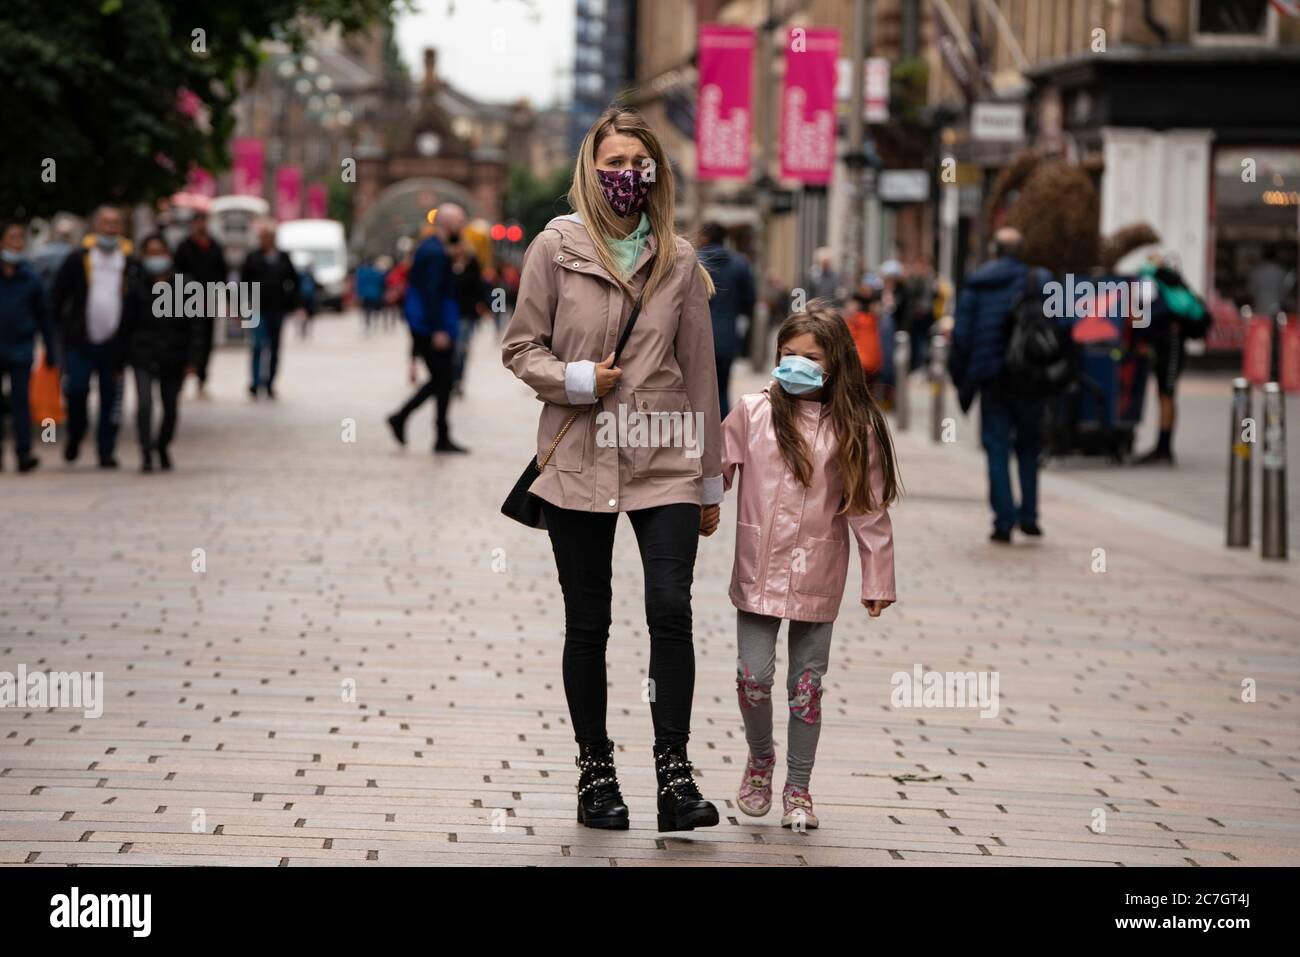 Glasgow, Scotland, UK. 17 July, 2020.  Images from Glasgow city centre as covid-19 restrictions are relaxed and  the public are out and about shopping and at work. Pictured; Mother and daughter walking on Buchanan Street wearing face coverings. Iain Masterton/Alamy Live News Stock Photo